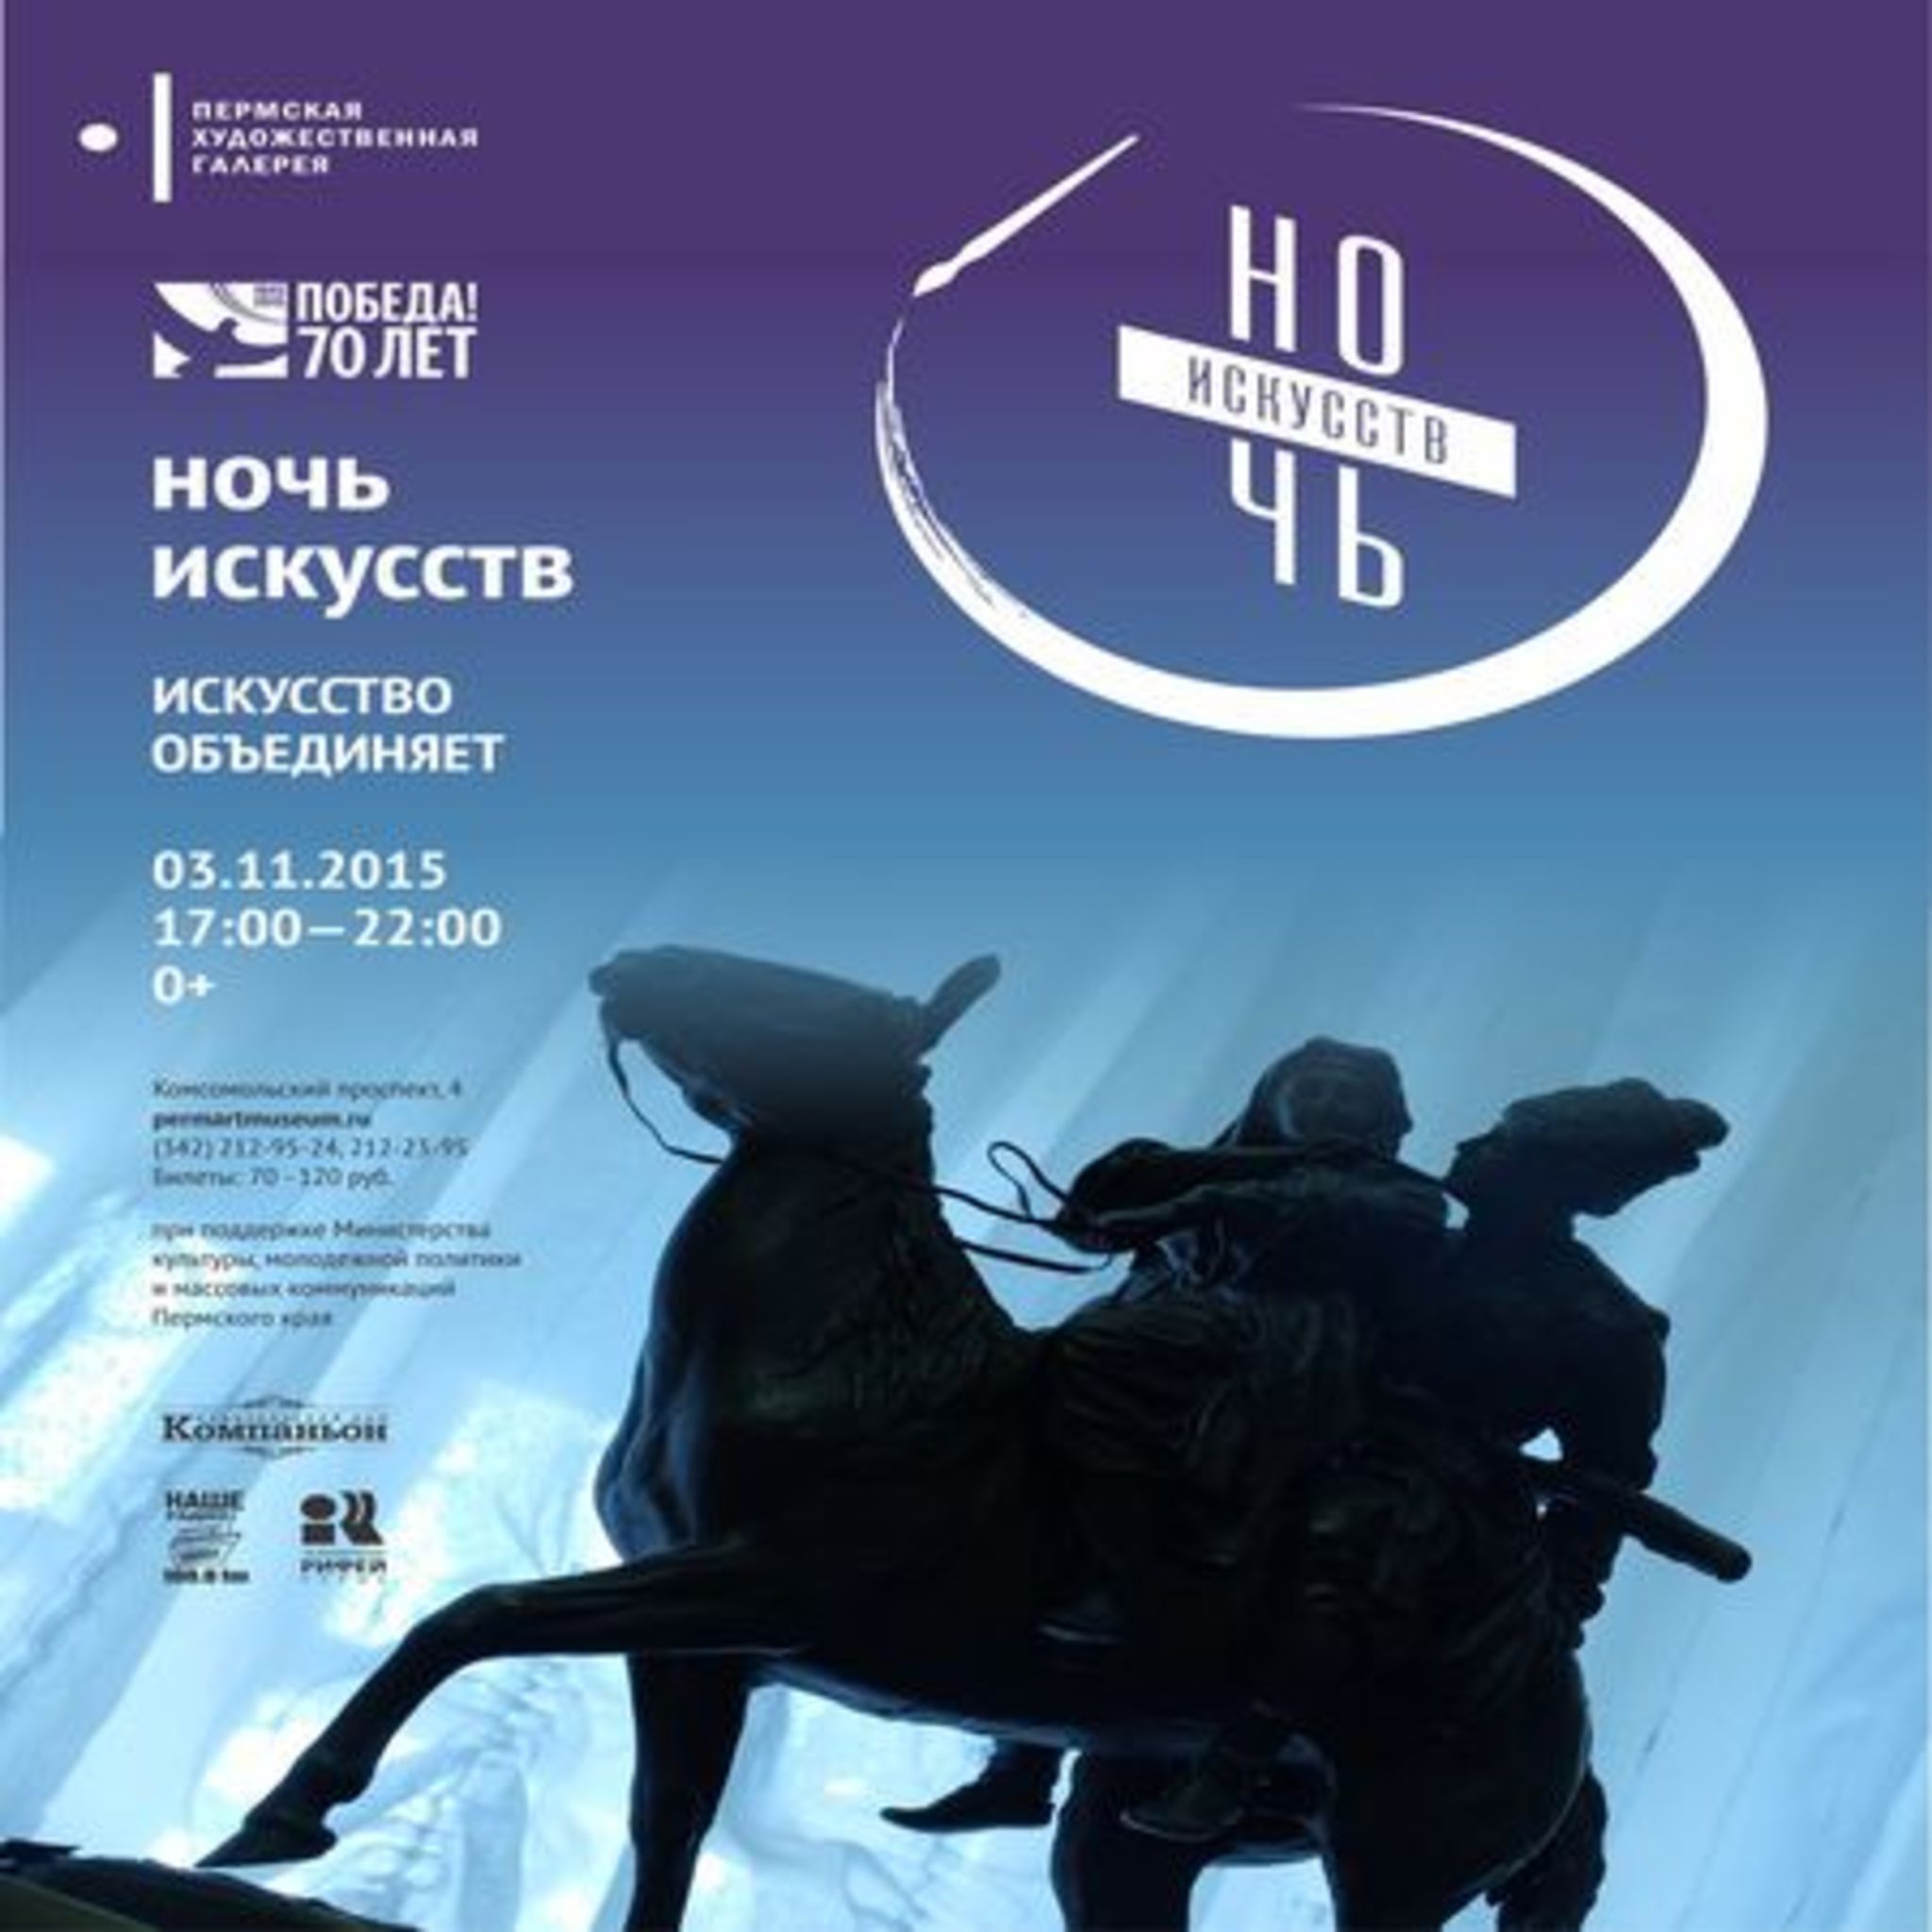 Night of the Arts 2015 in Perm Art Gallery